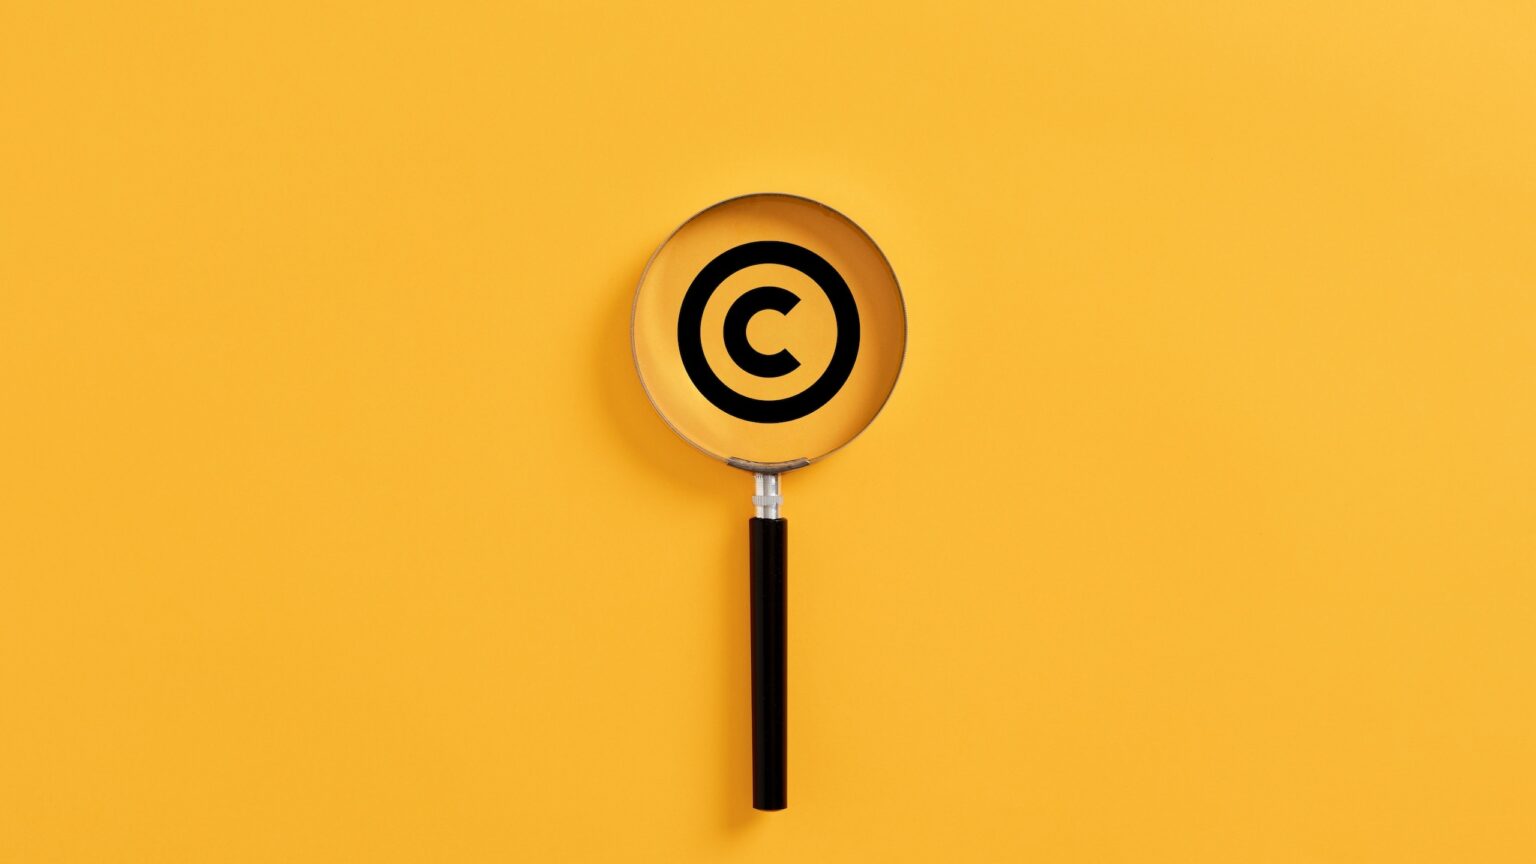 News Outlets Struggle to Apply Copyright Law Against ChatGPT